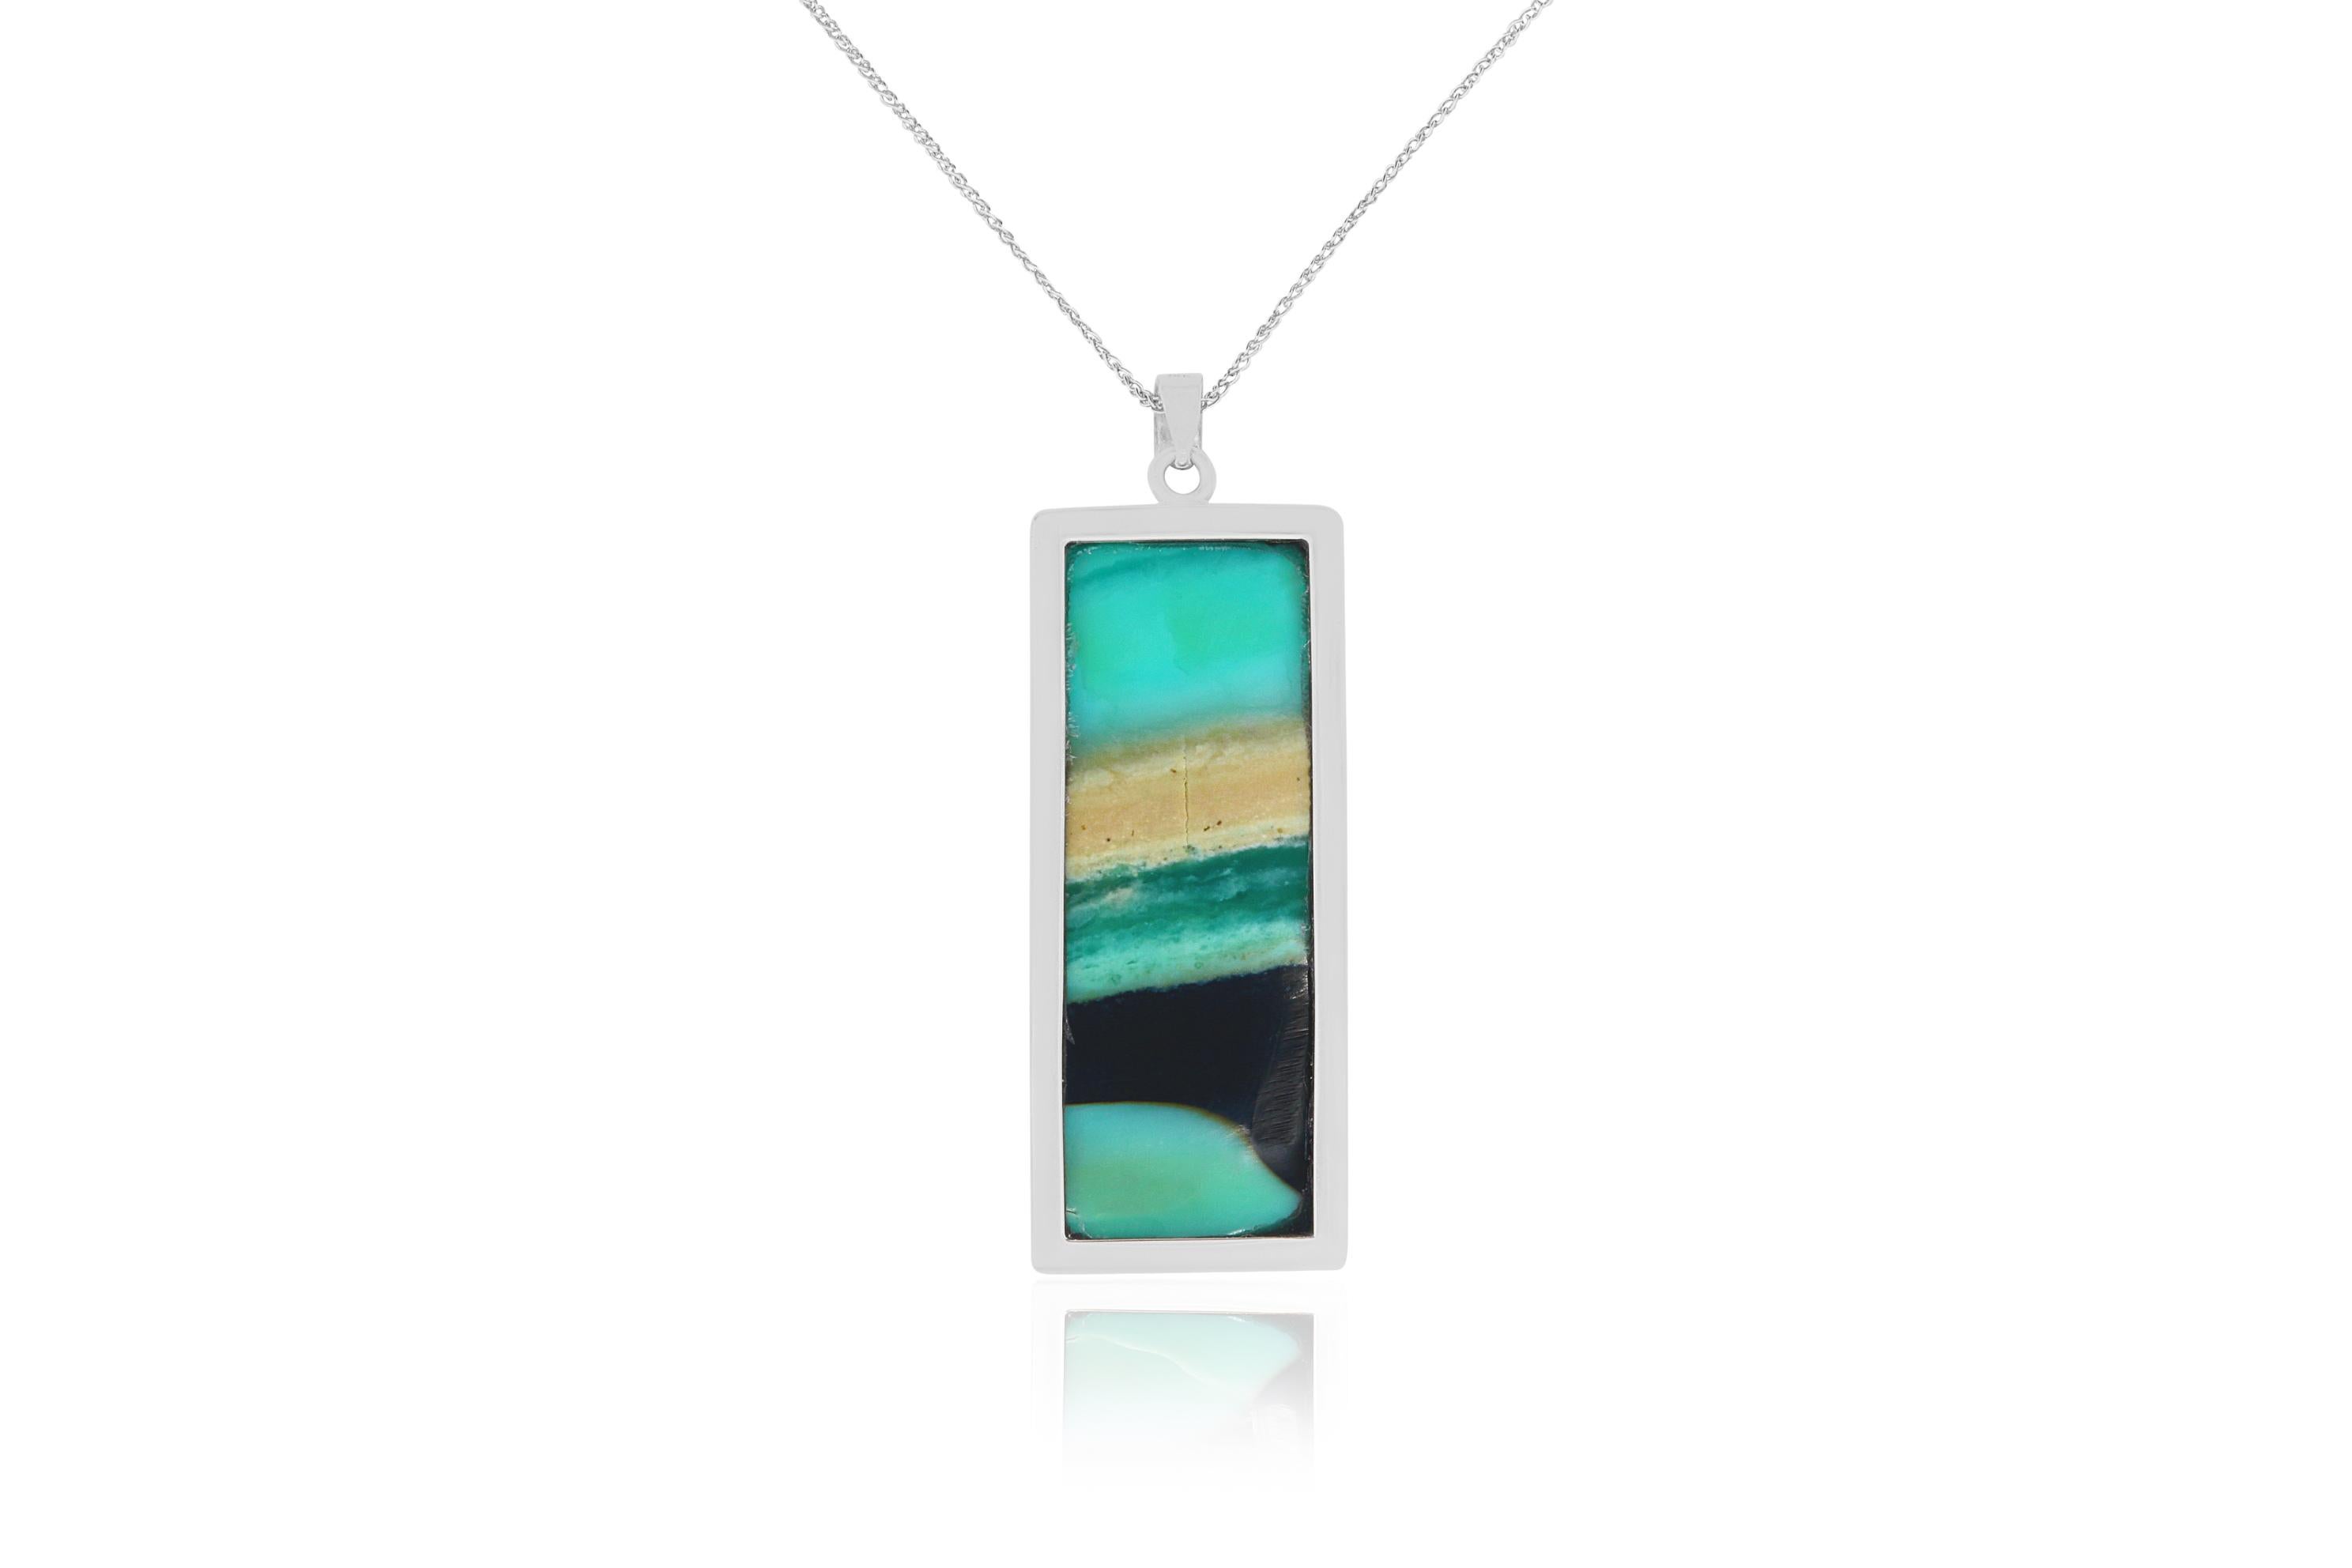 This unique elongated Opal stone features vivid turquoise, black and tan hues!

Material: 14K White Gold
Center Stone Details: 1  Opal
Chain:  18 inch

Fine one-of-a-kind craftsmanship meets incredible quality in this breathtaking piece of